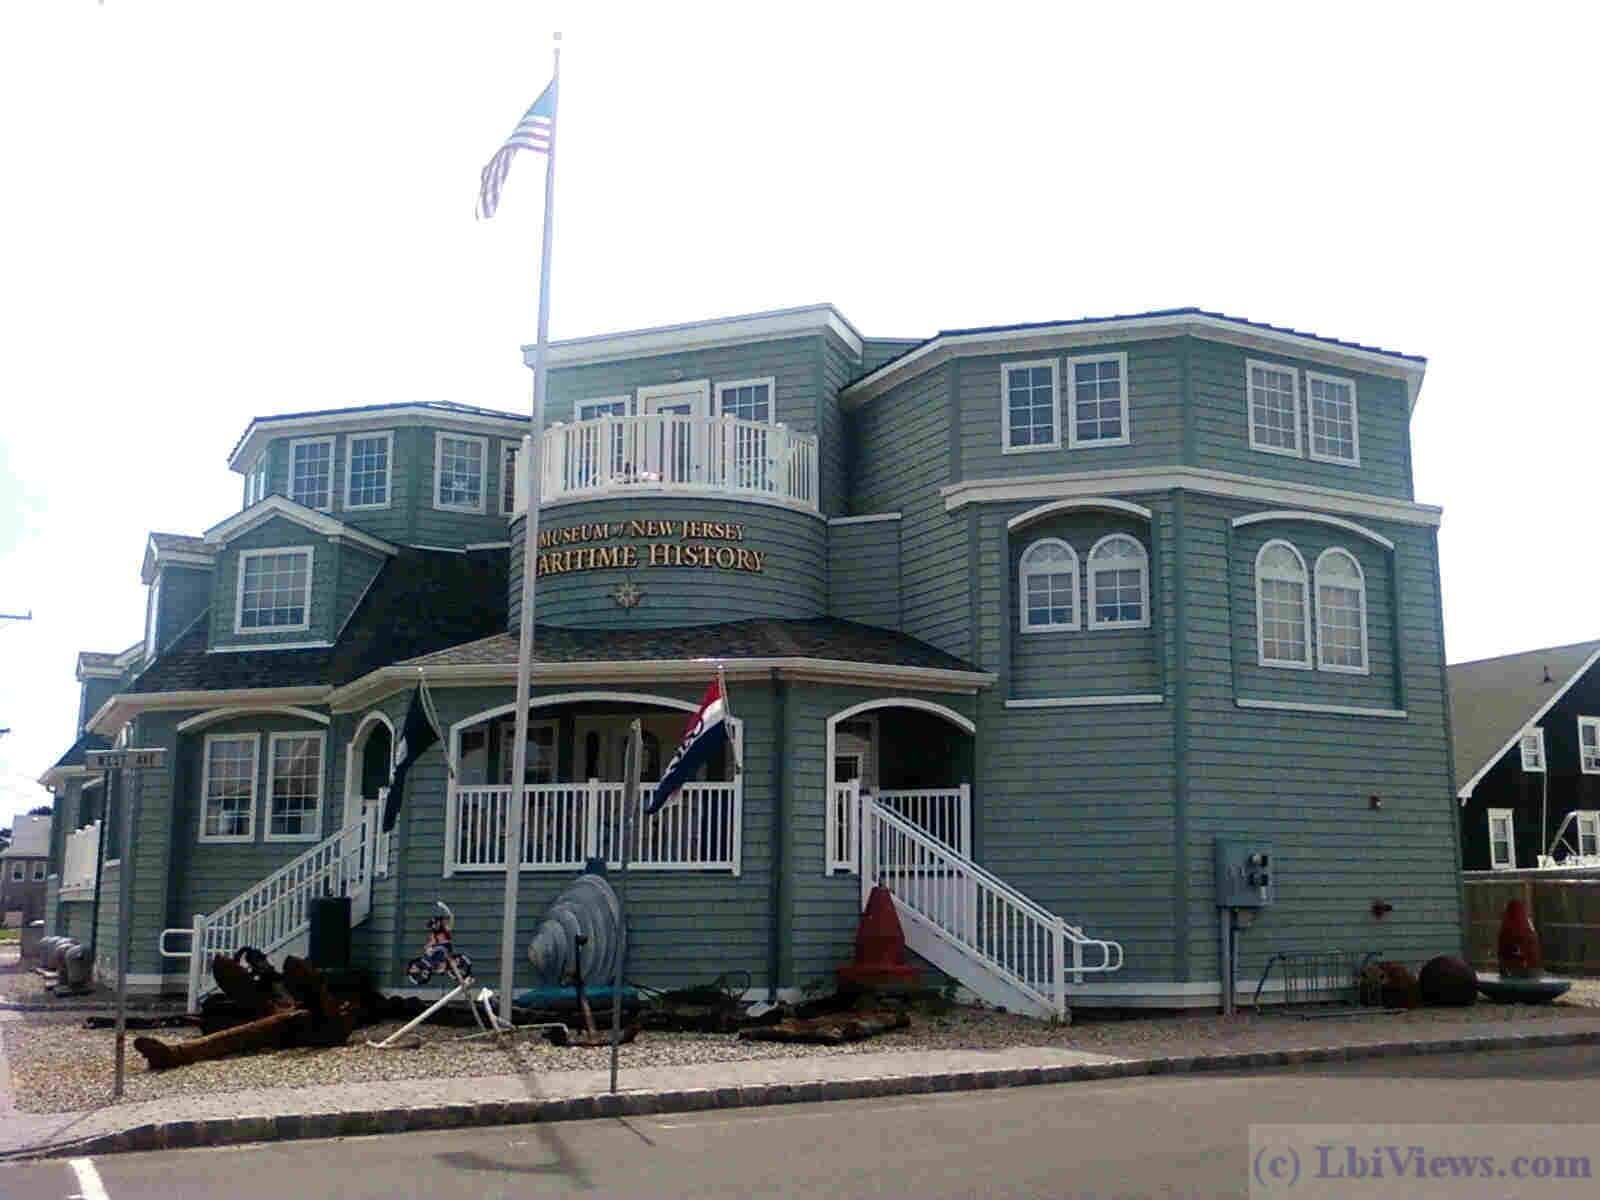 The Maritime Museum of New Jersey in Beach Haven